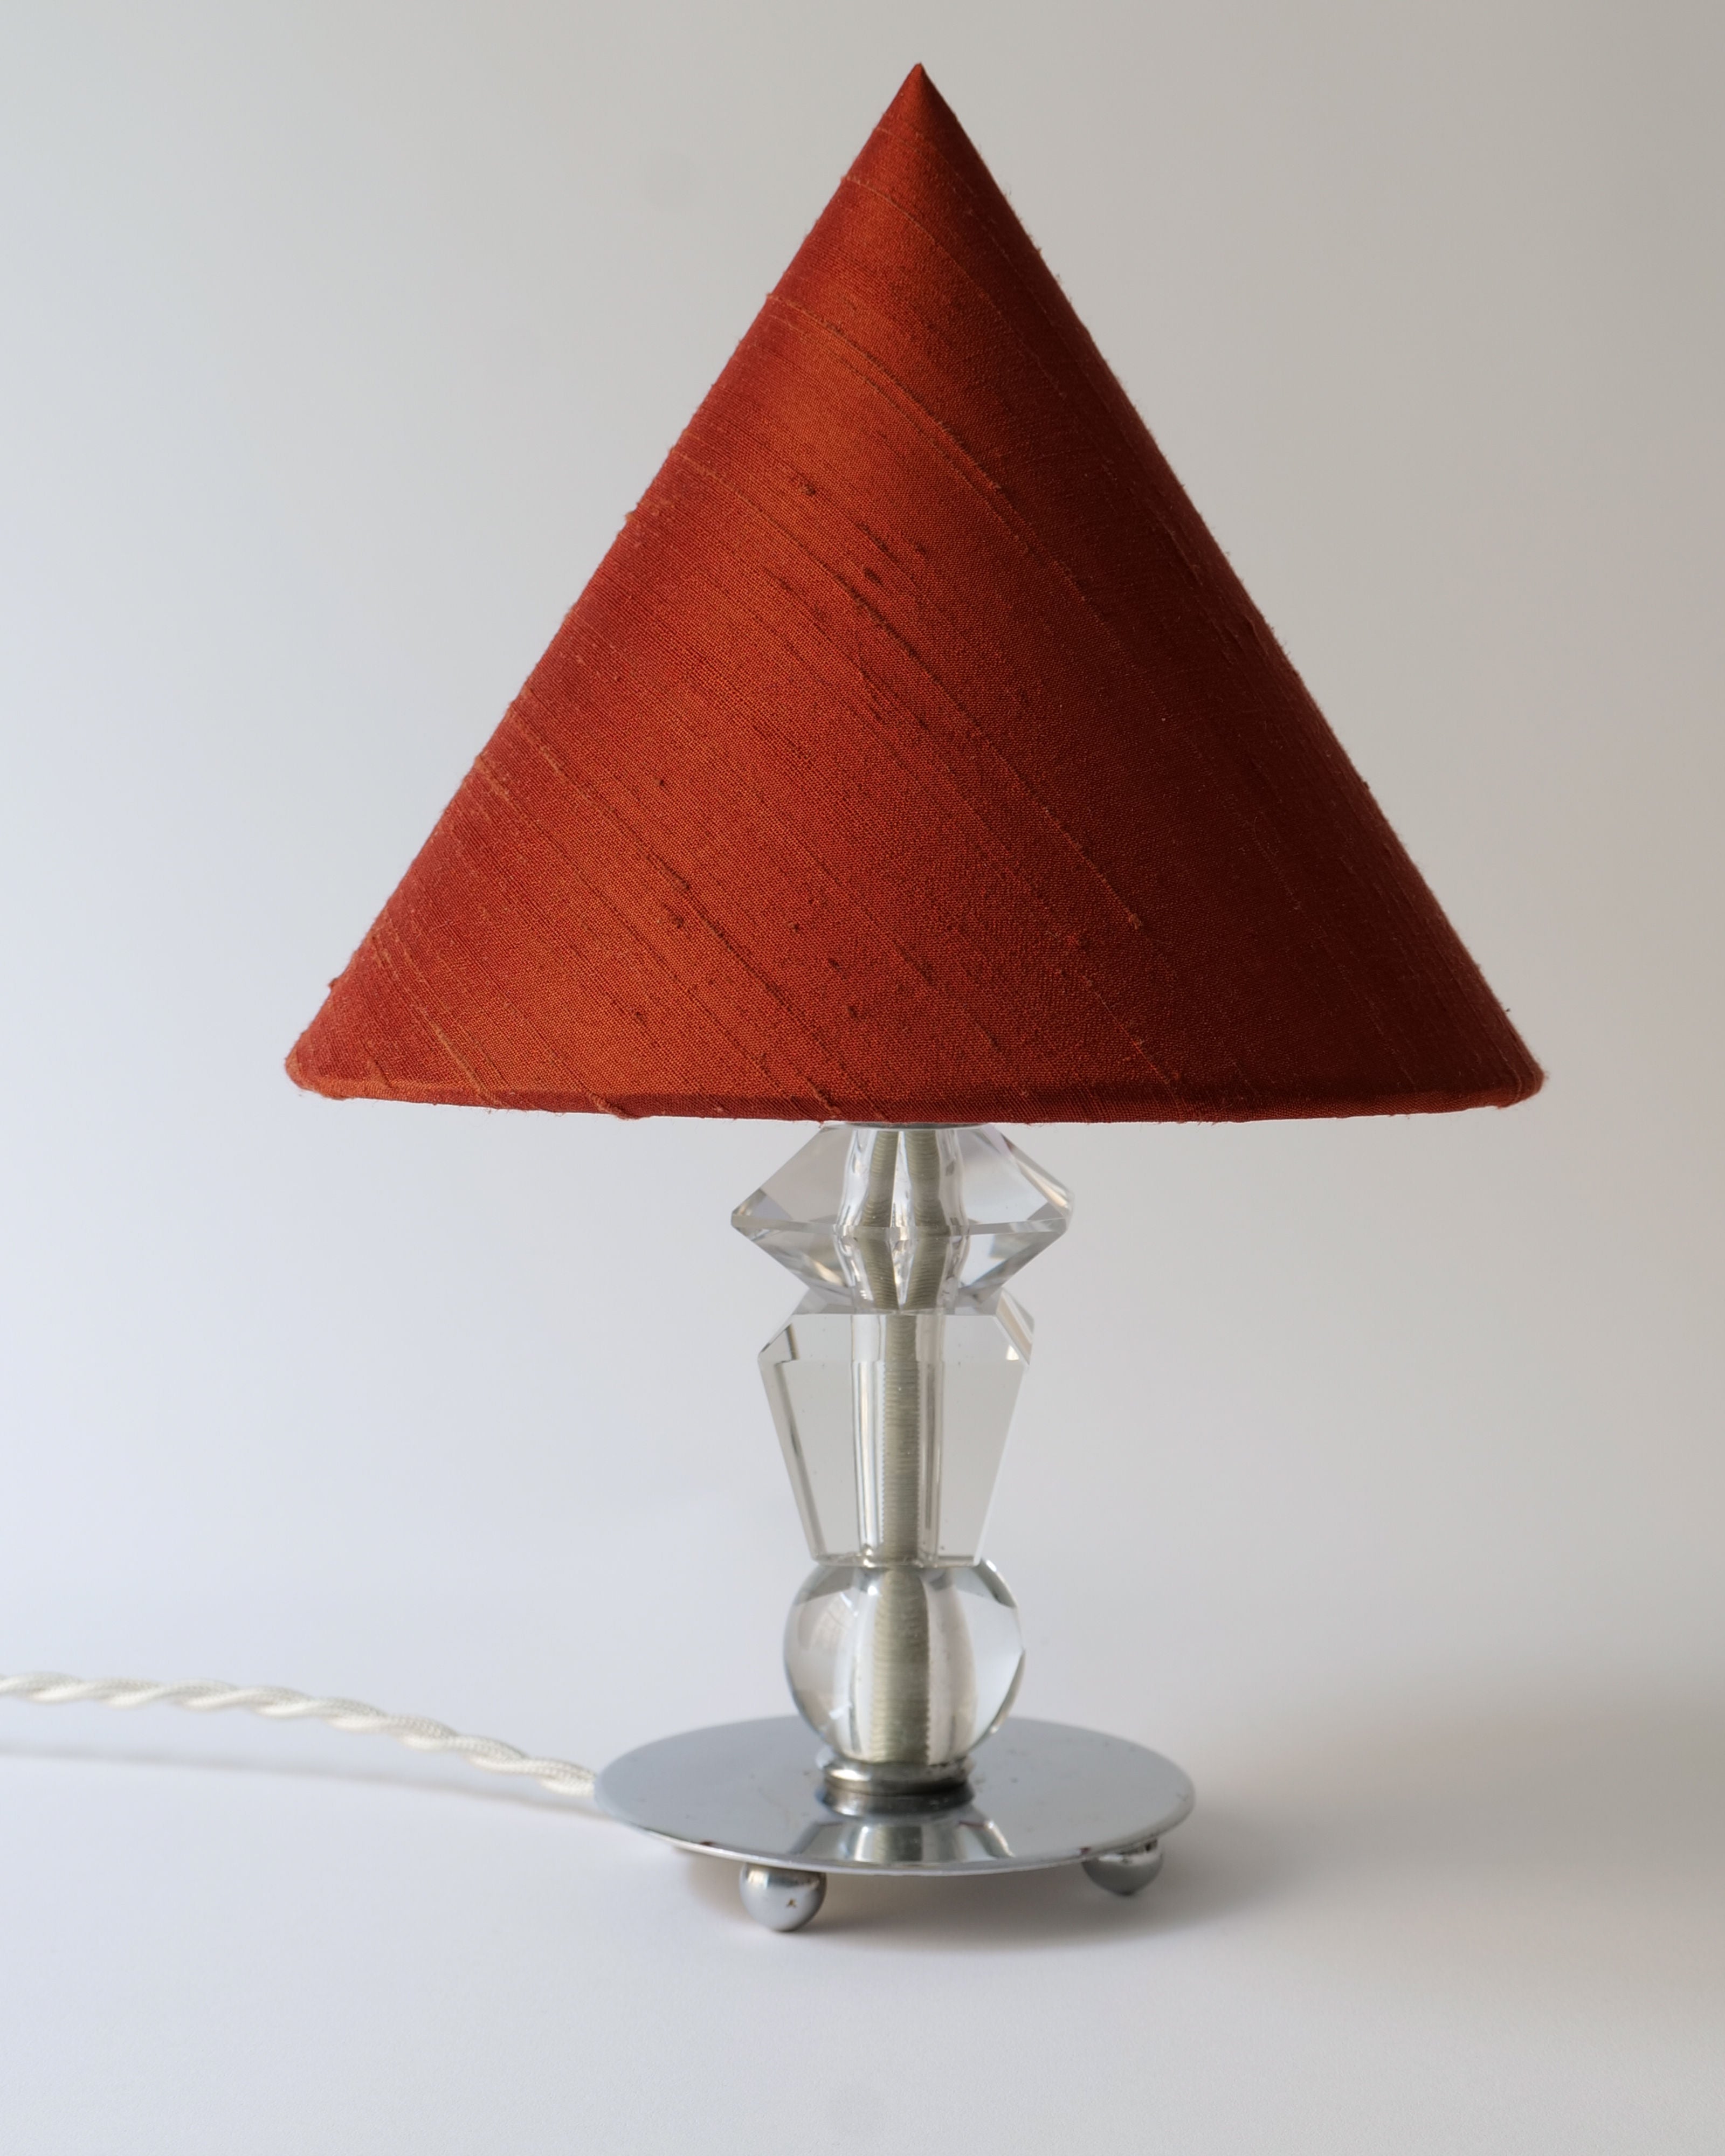 A contemporary boudoir bedside lamp with a striking red conical shade, mounted on a transparent glass base with a metallic stem and circular platform, accompanied by a white woven cable: The Deco Crystal Table Lamp by Collection apart.